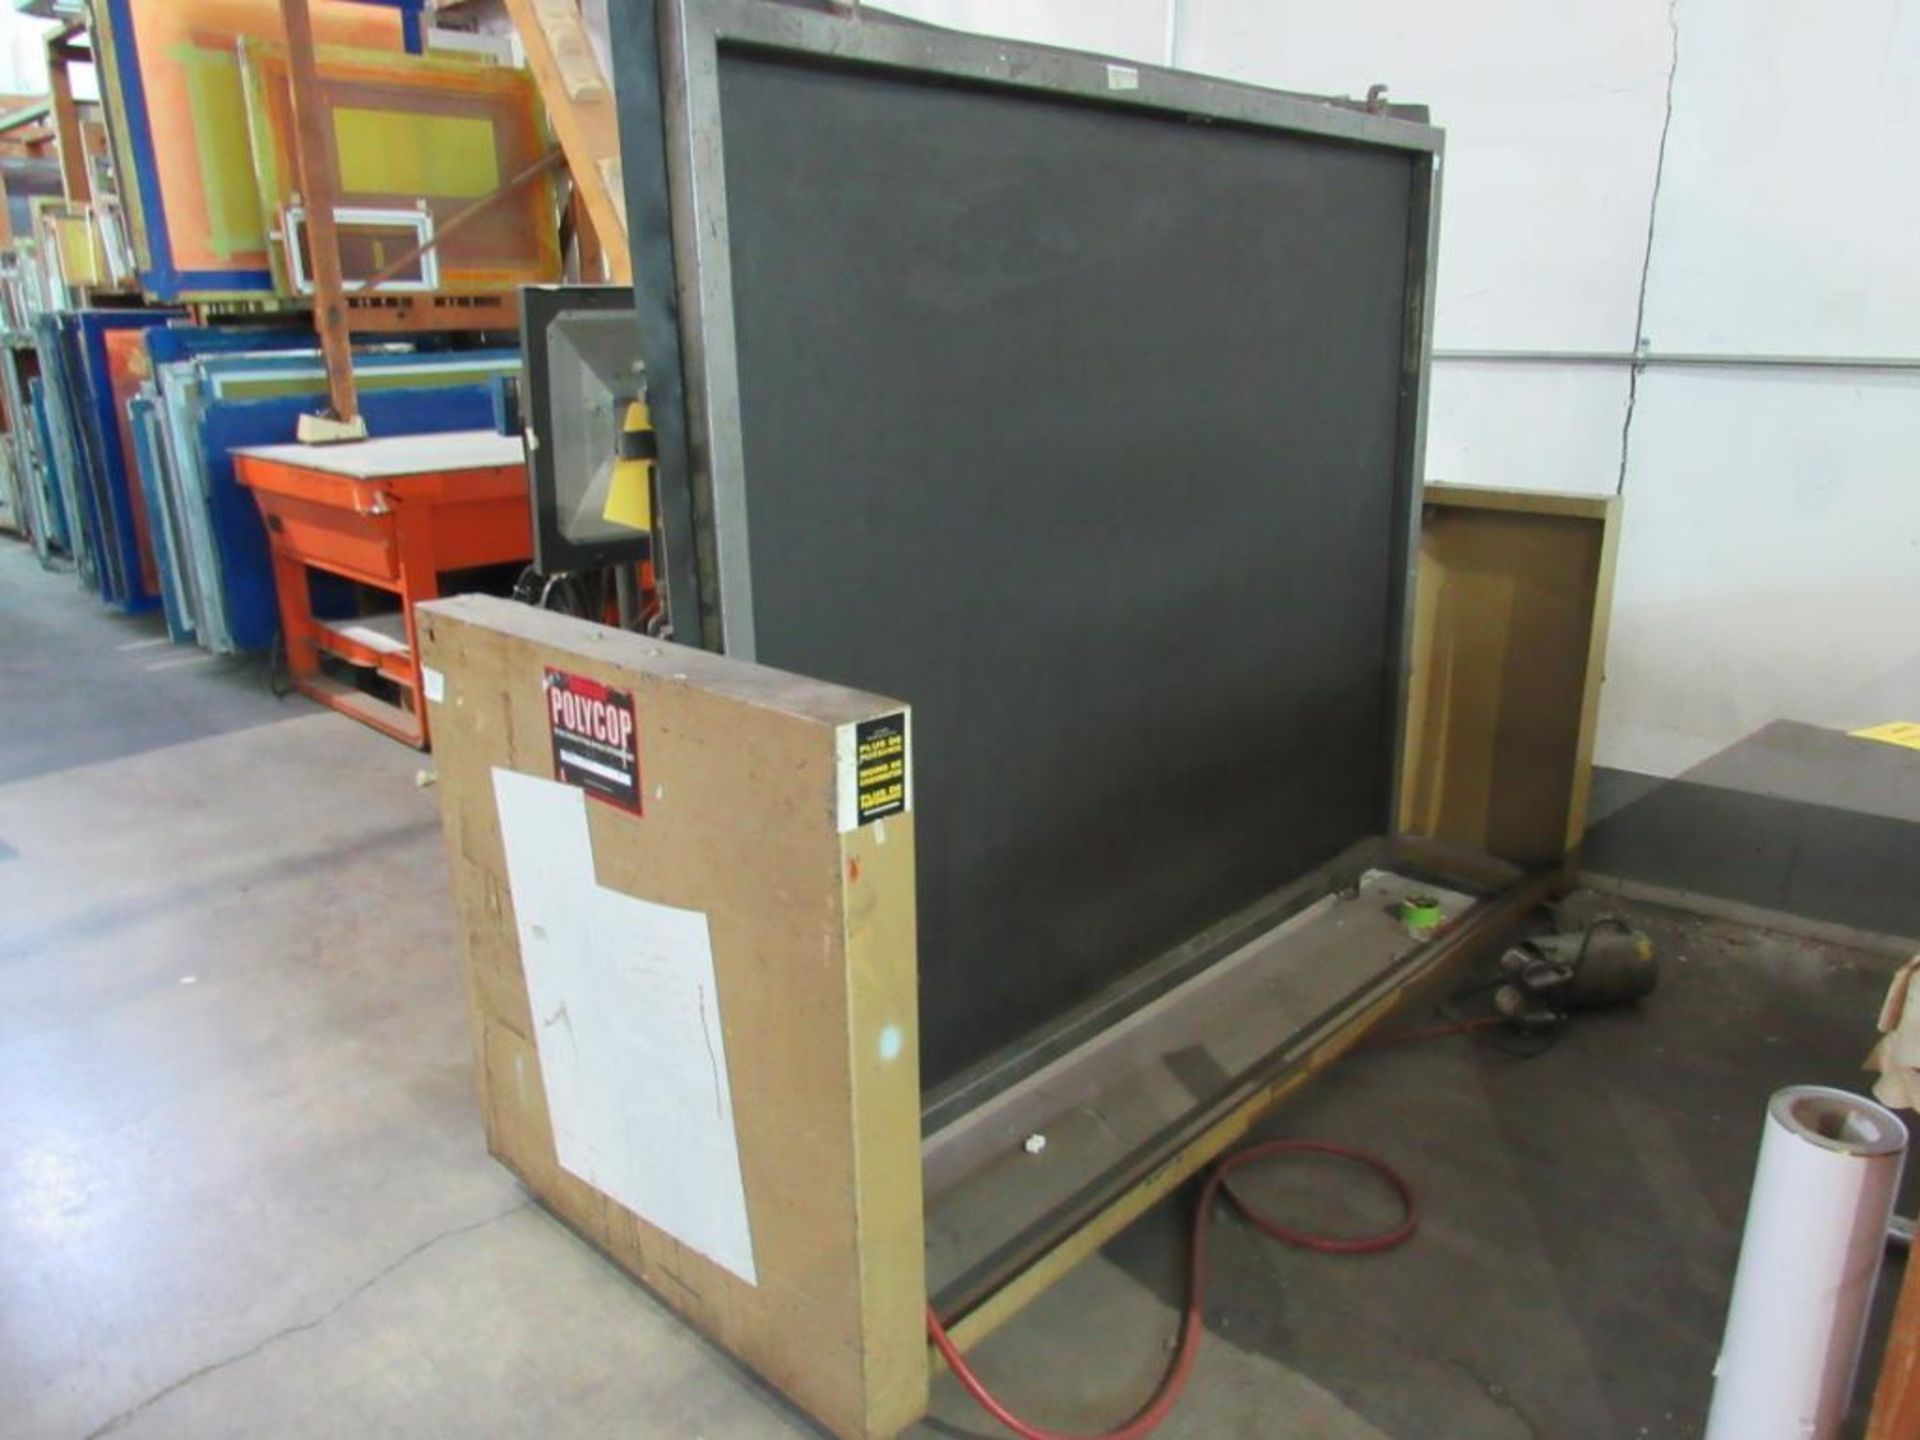 American Polycop Direct Contact Photo Screen Exposing Unit, 60 in. x 72 in., S/N JD-12878 - Image 2 of 2